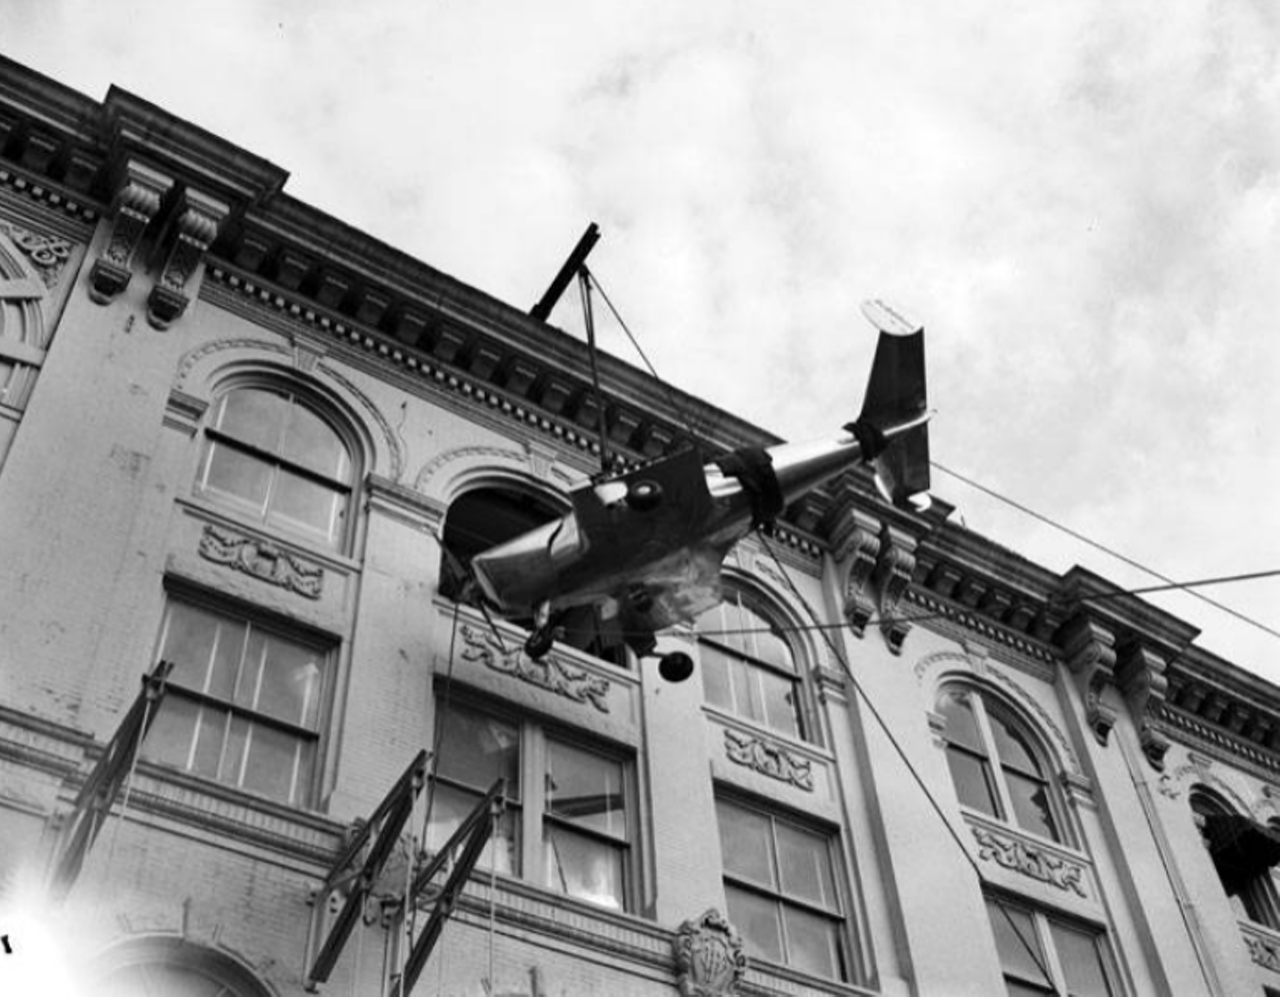 A crew hoisted this airplane up through a window, as it was part of a promotional season around Christmas.